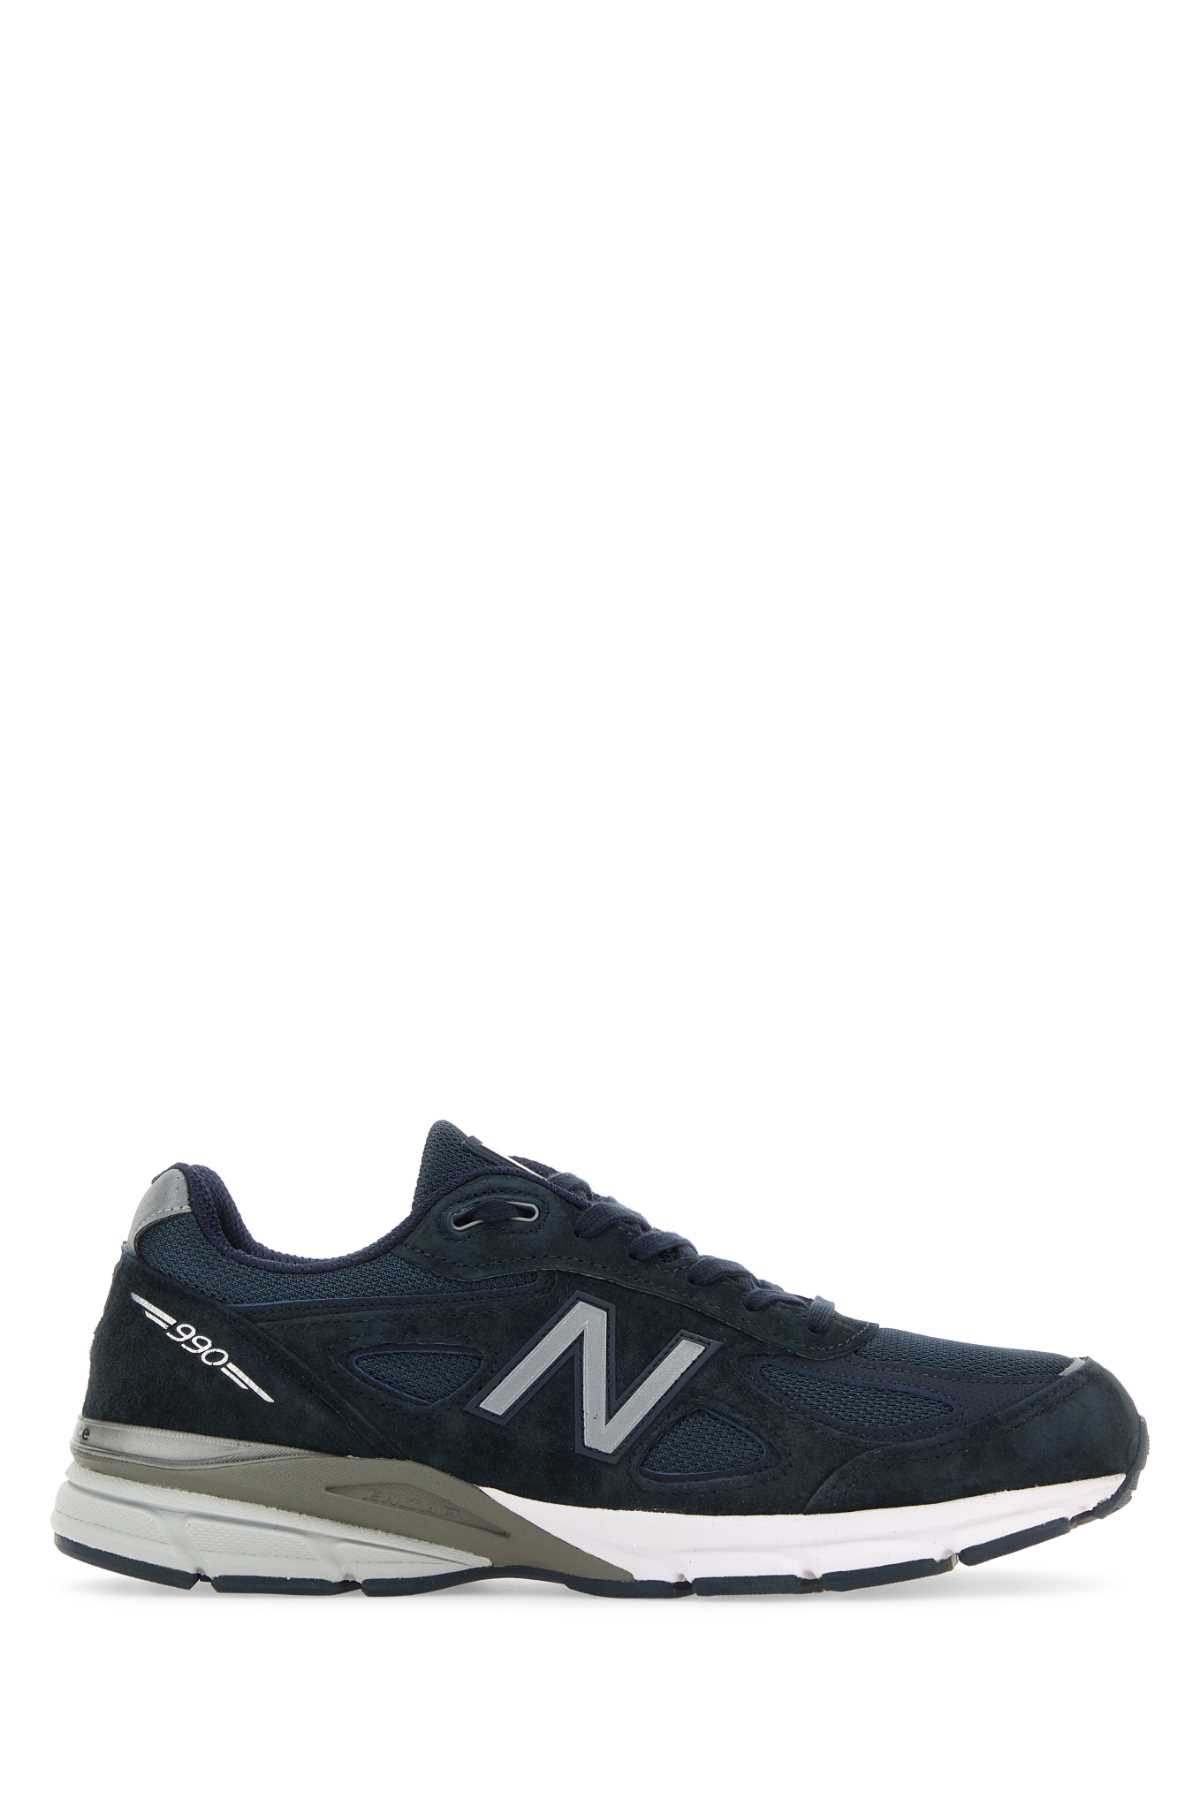 Shop New Balance Blue Fabric And Suede 990v4 Sneakers In Navy